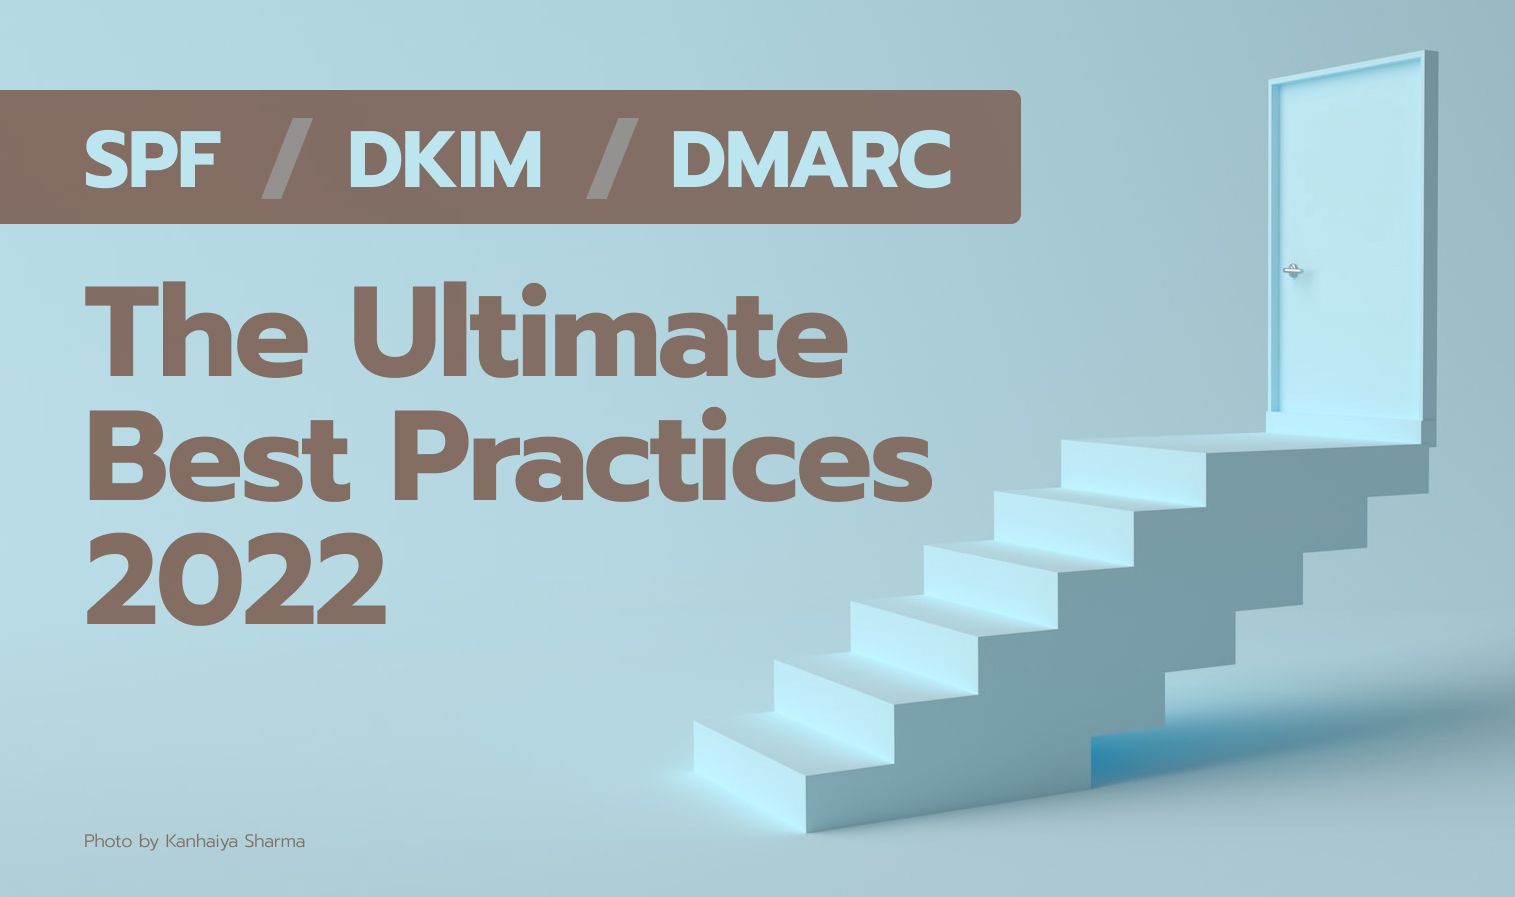 The Ultimate SPF / DKIM / DMARC Best Practices 2022